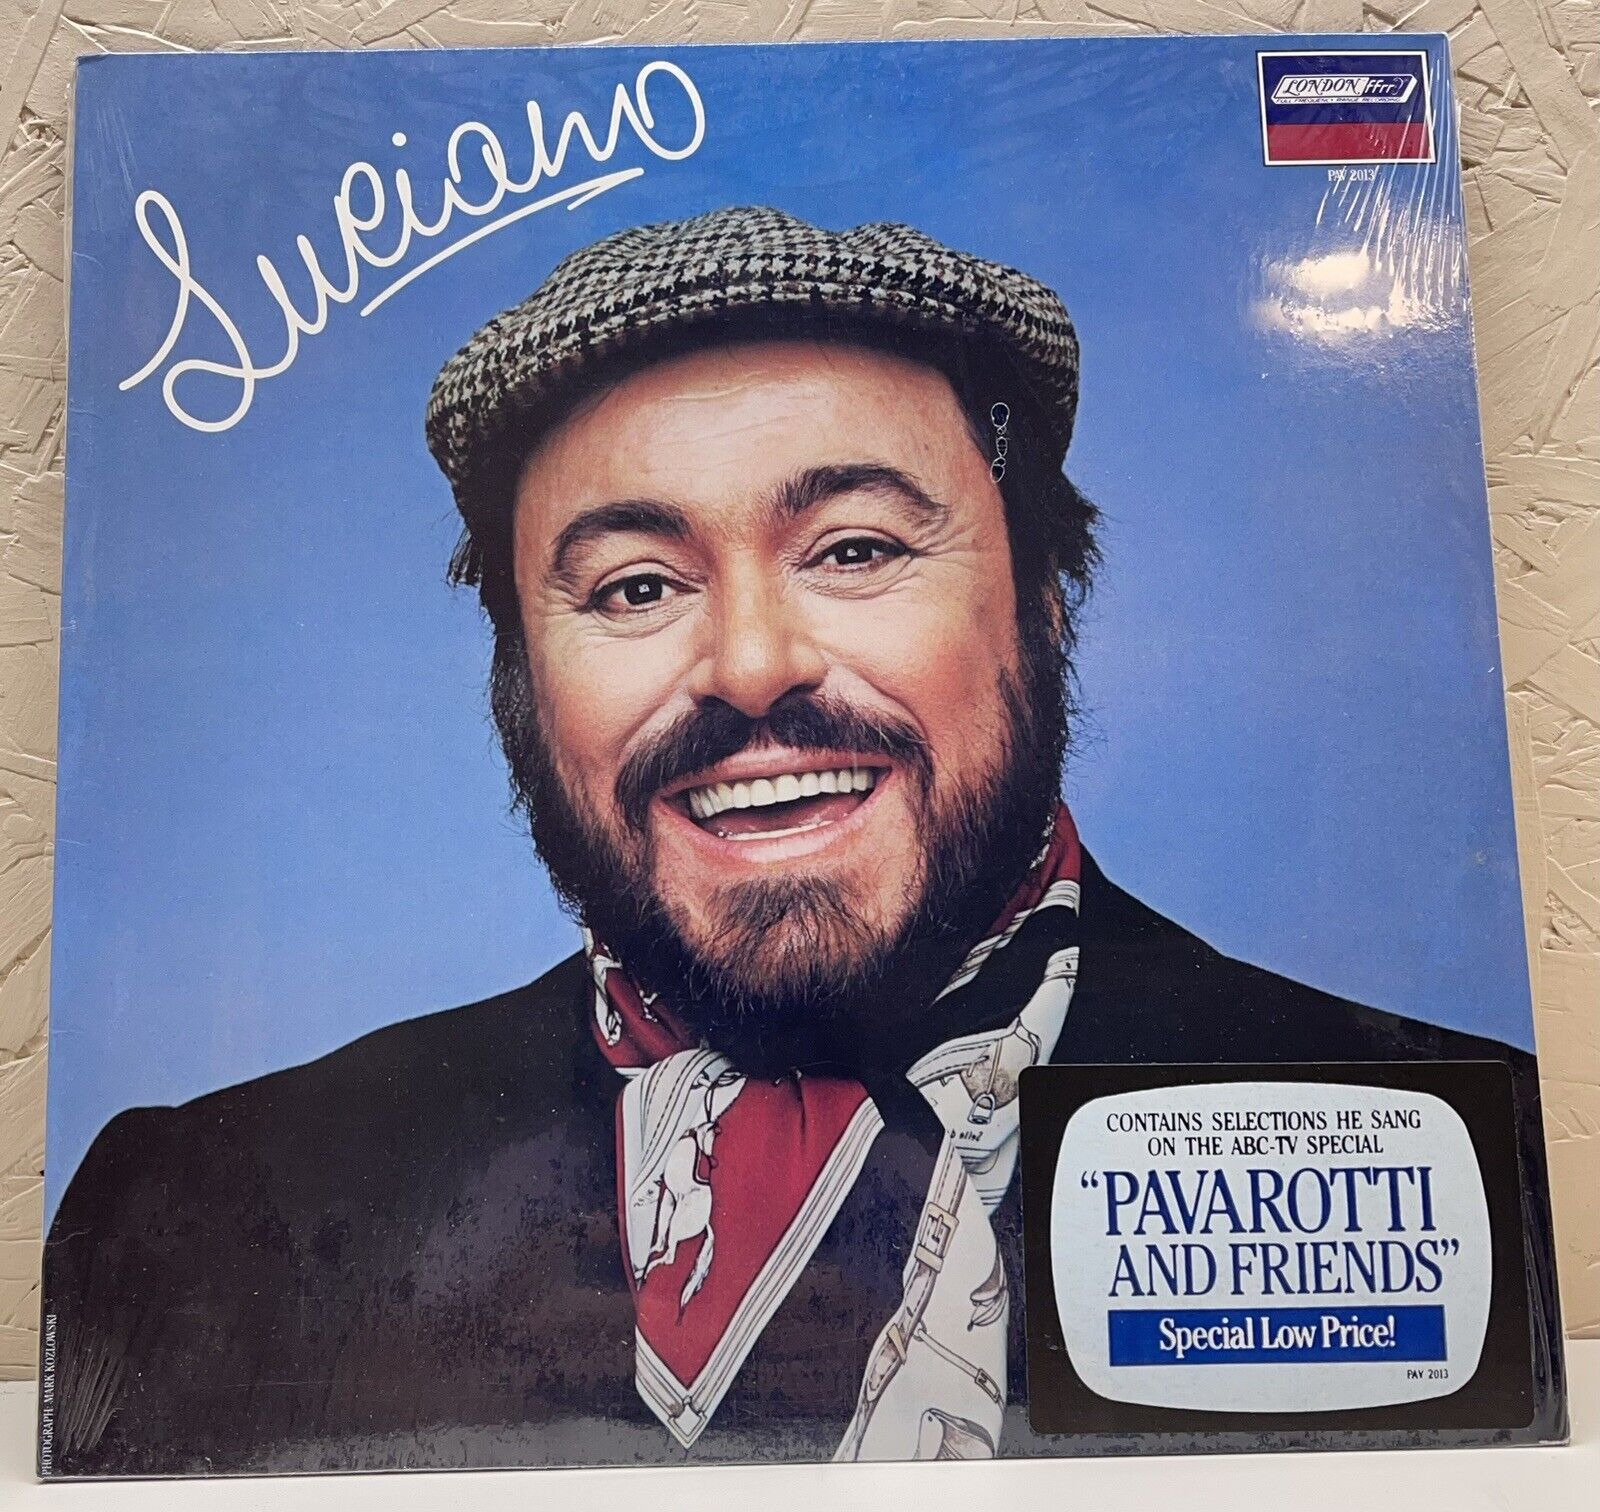 Luciano By Pavarotti | Vinyl | London FFrr PAV 2013 | 1982 Pressing | Wrapped